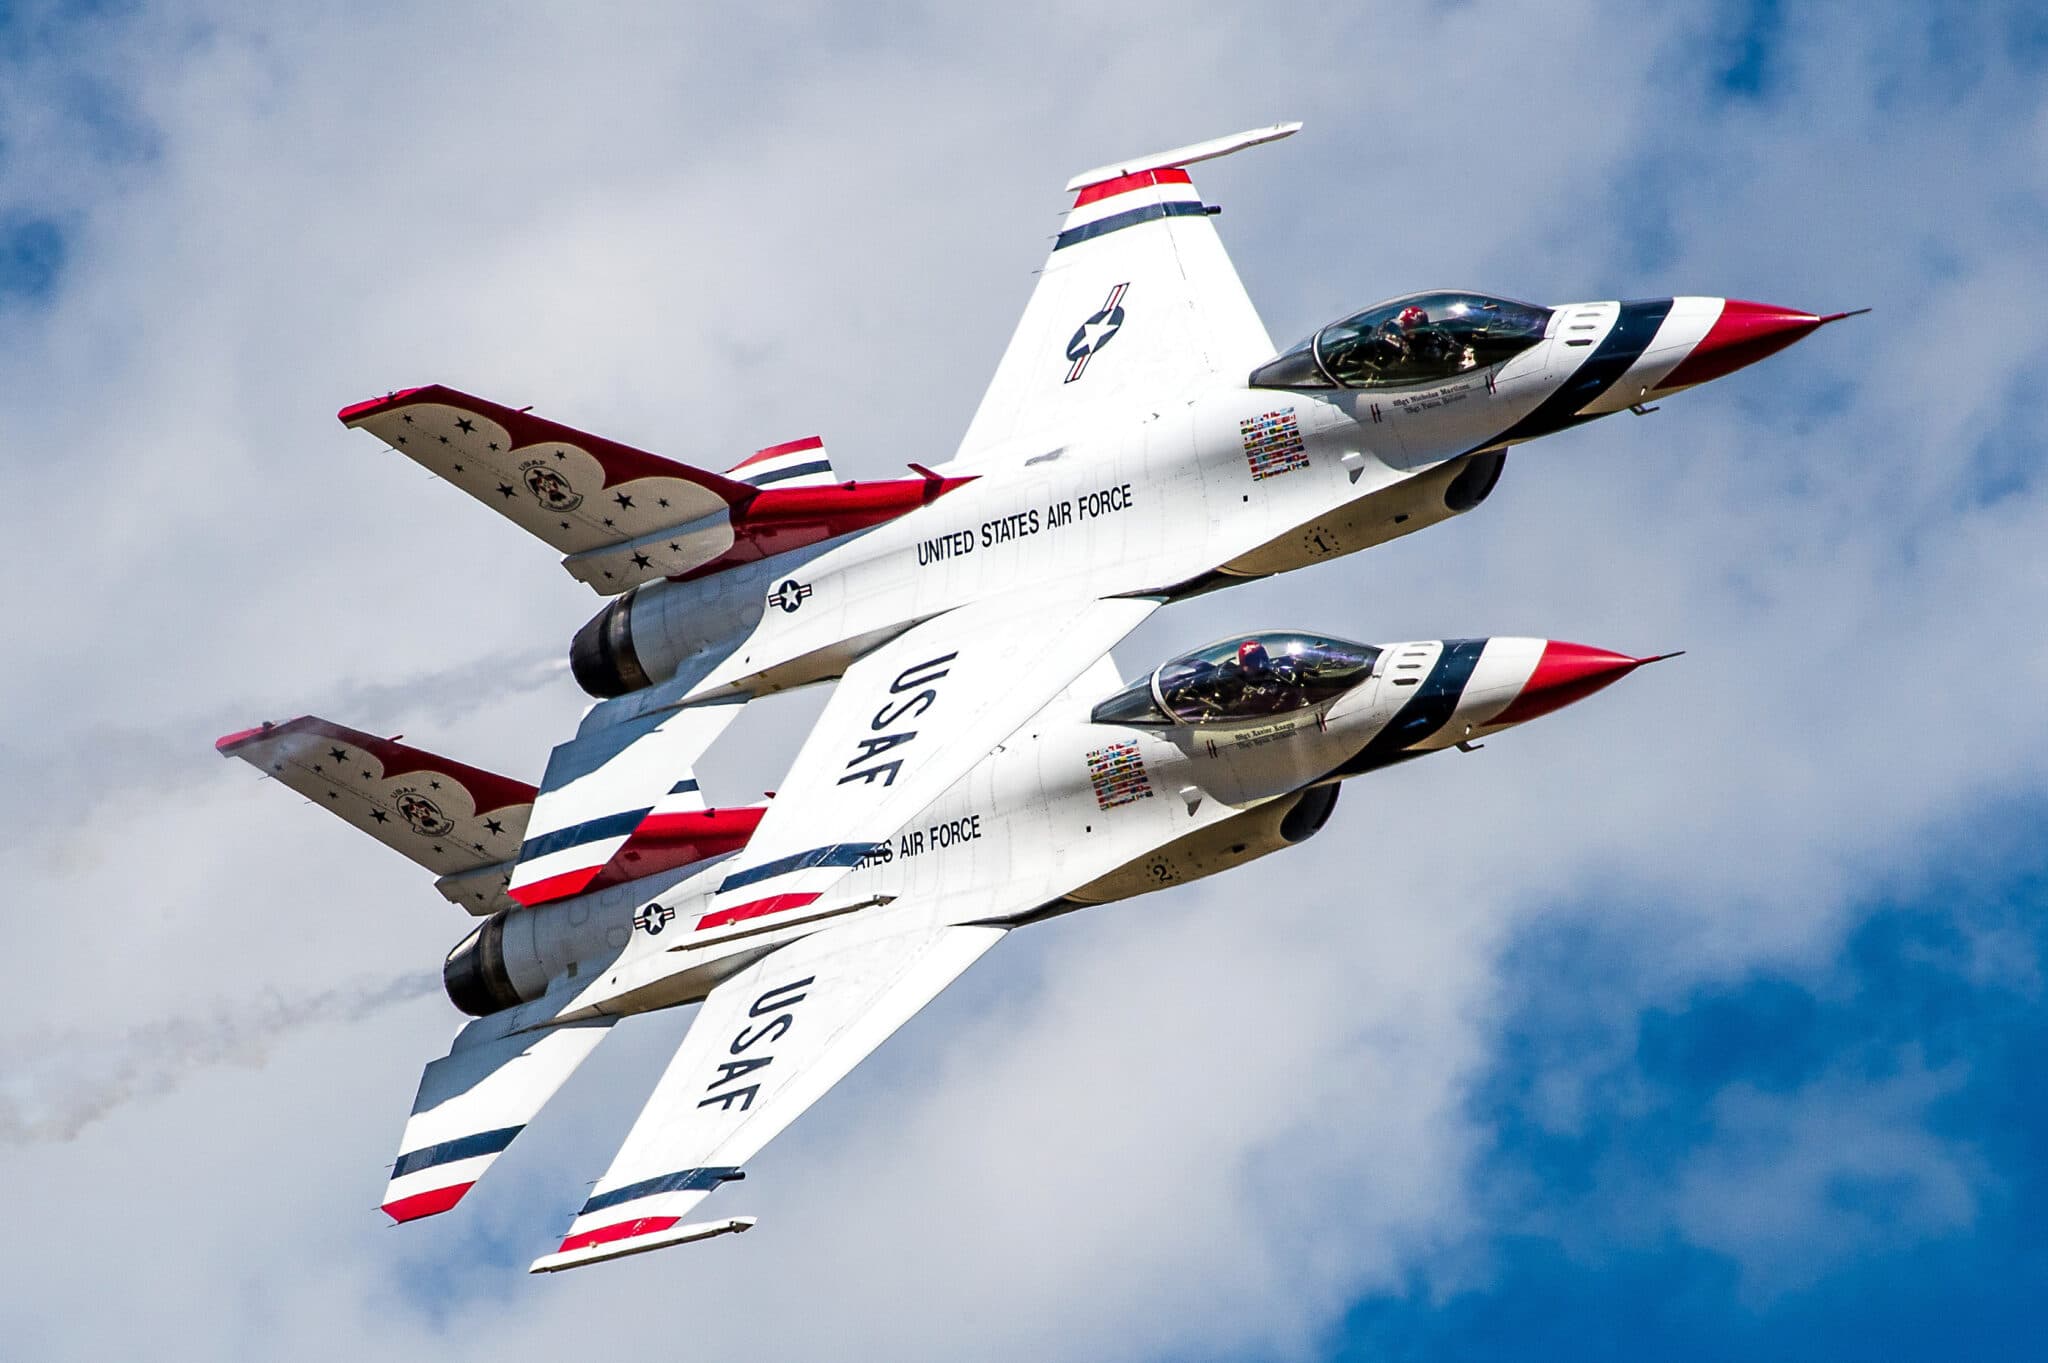 Air Force Thunderbirds to Headline Great Tennessee Airshow